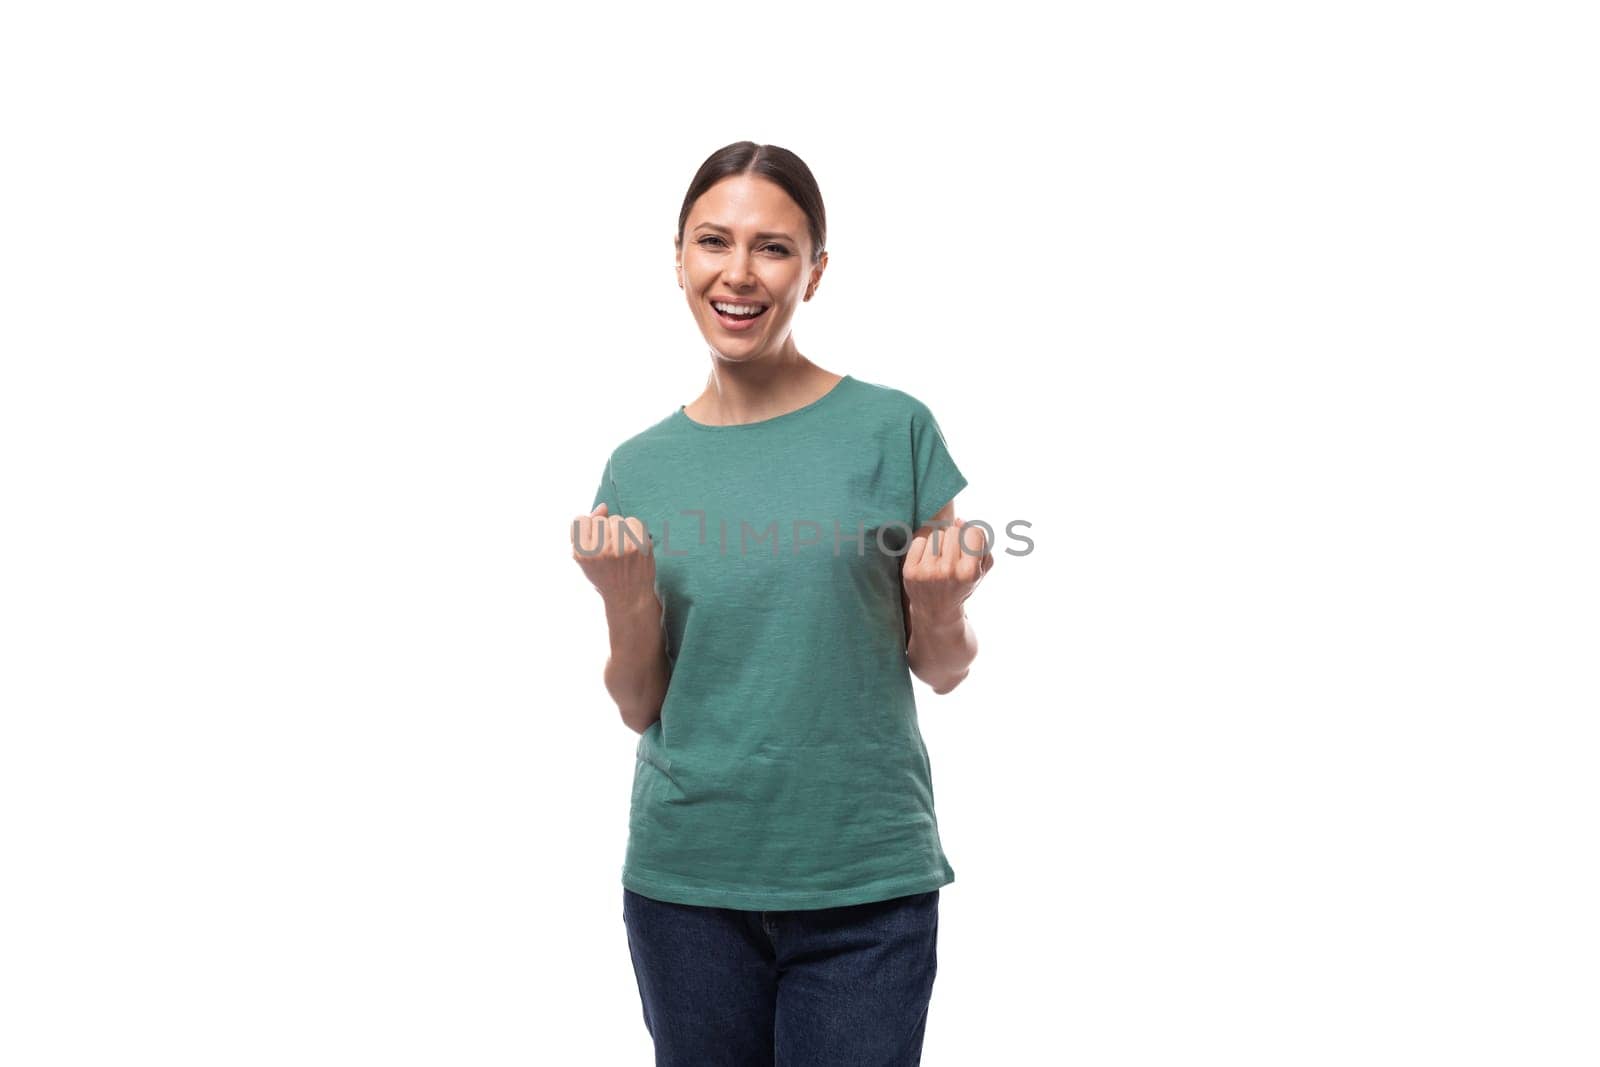 30 year old brunette woman with ponytail dressed in a green basic t-shirt smiling on a white background with copy space.